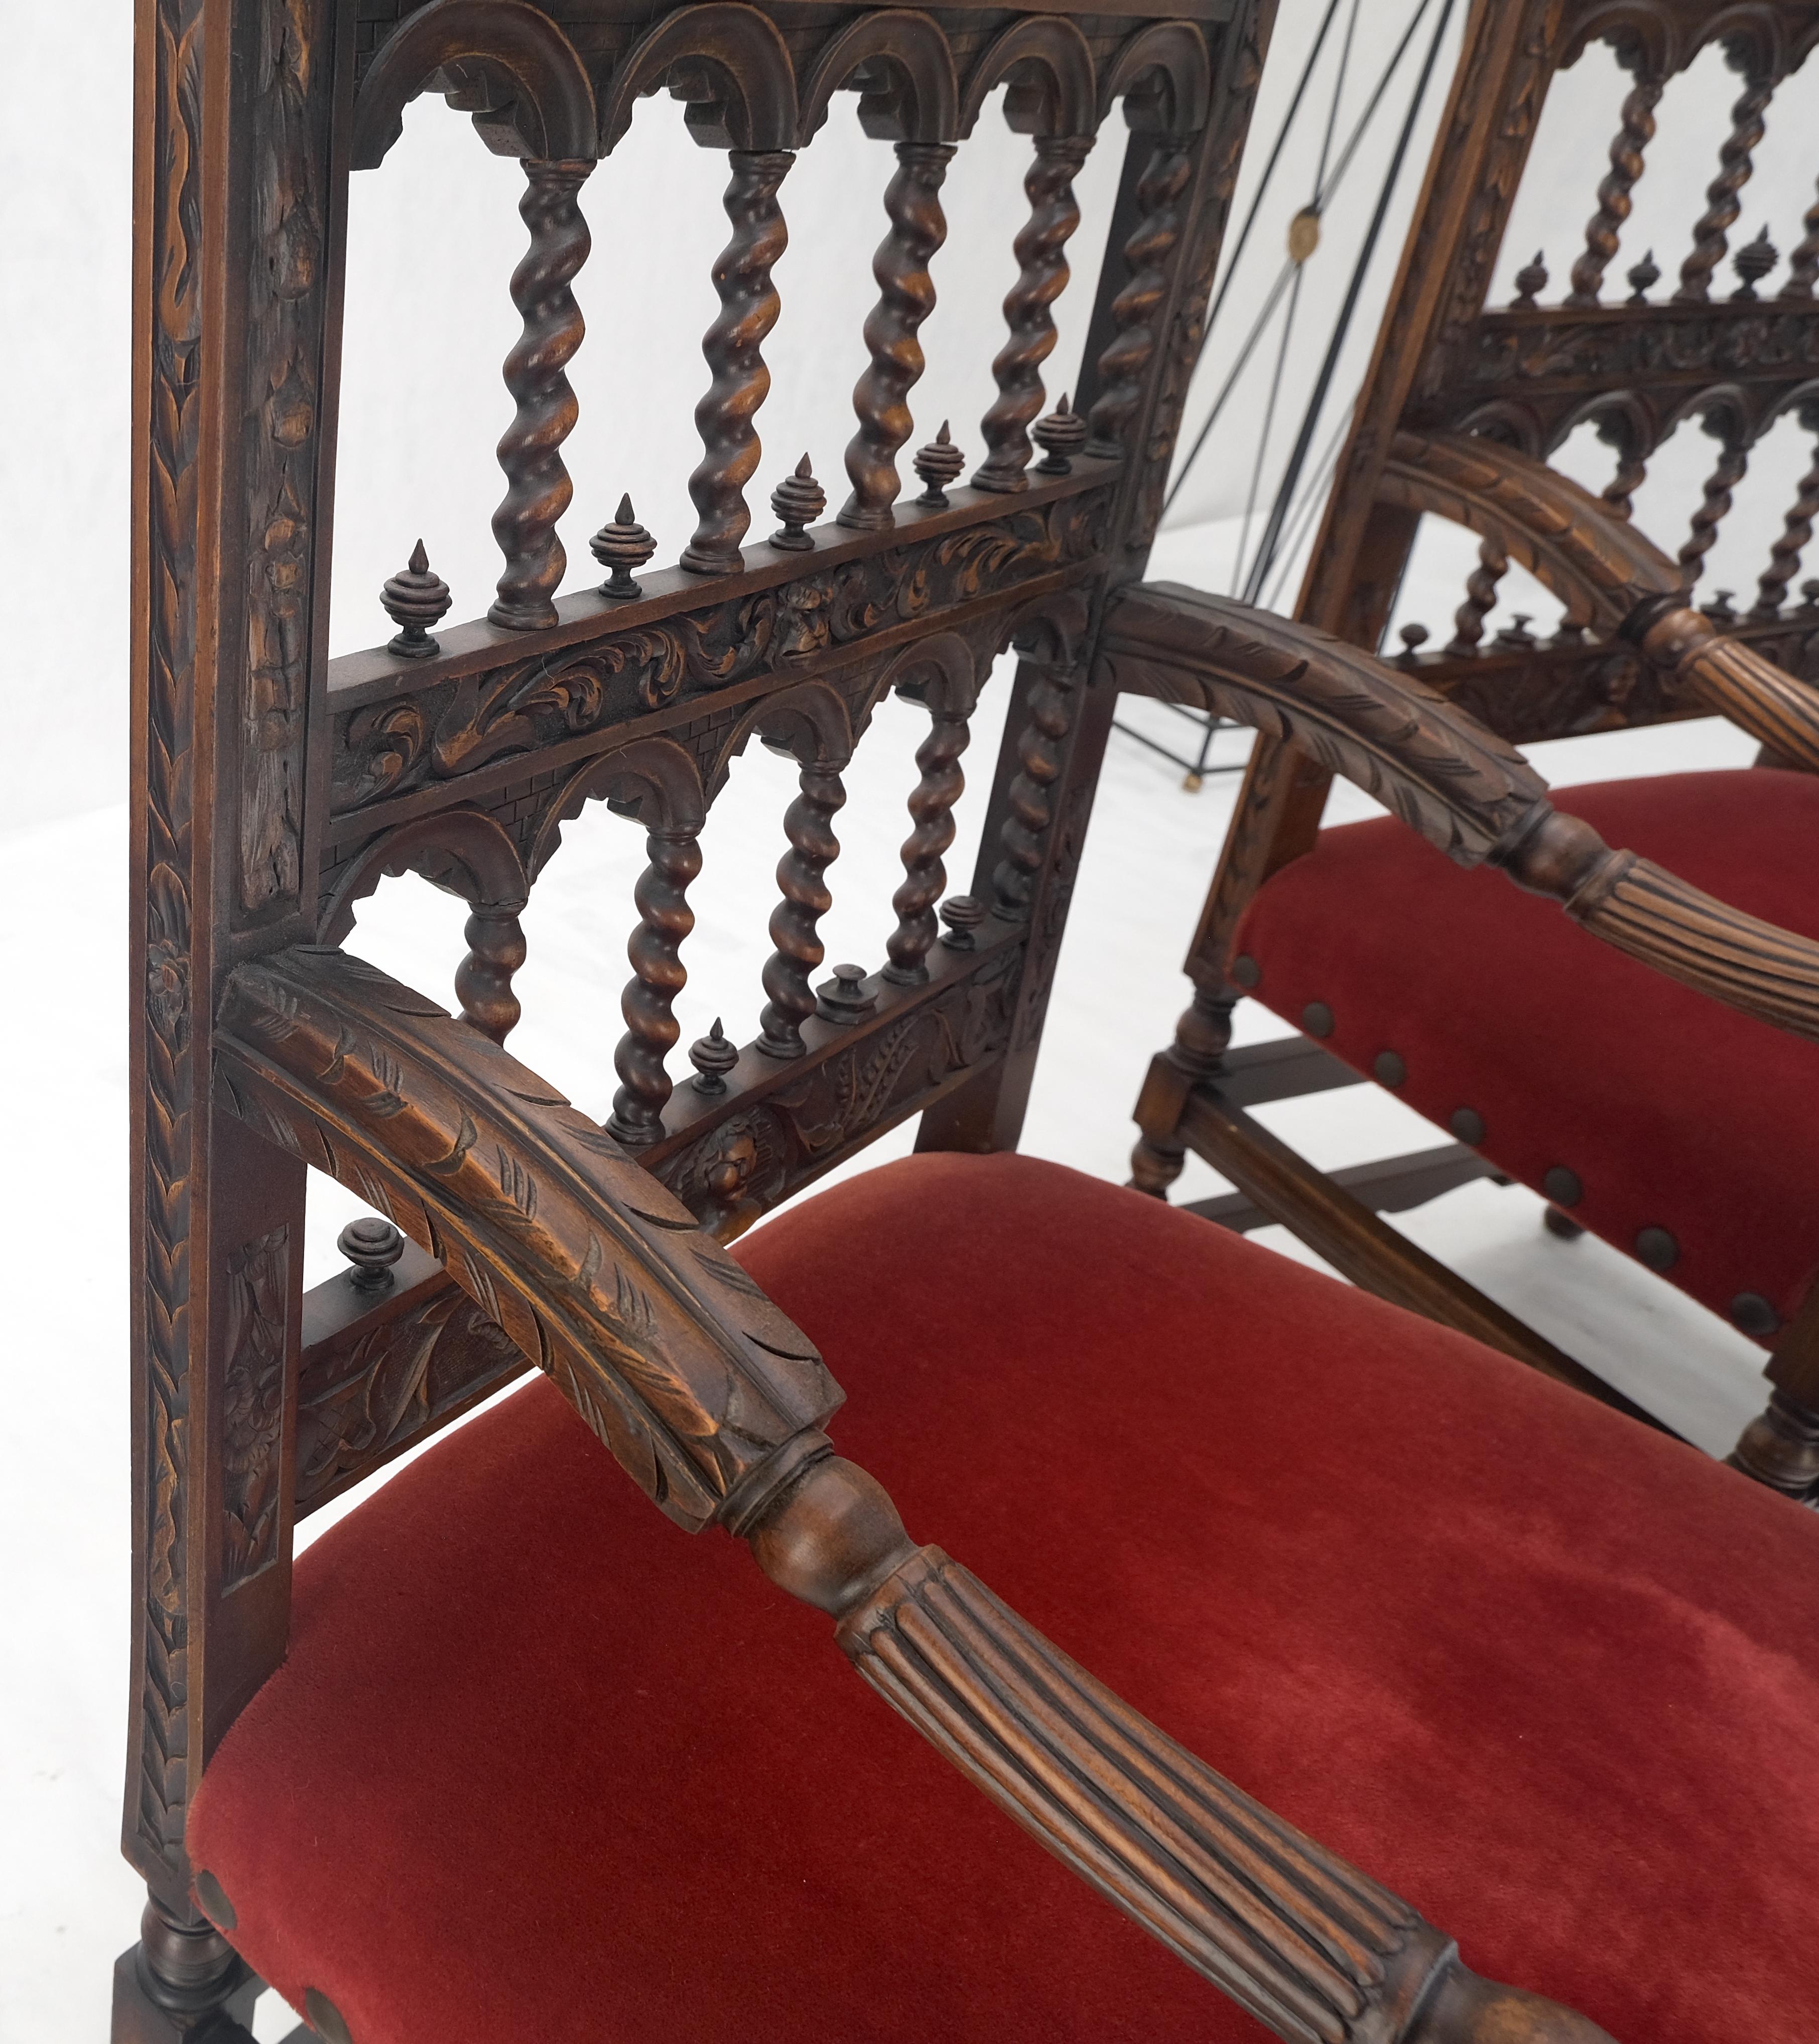 Fine Carved North Winds Faces Heavy Oak Arm Chairs Twisted Spindles c1900s MINT For Sale 8